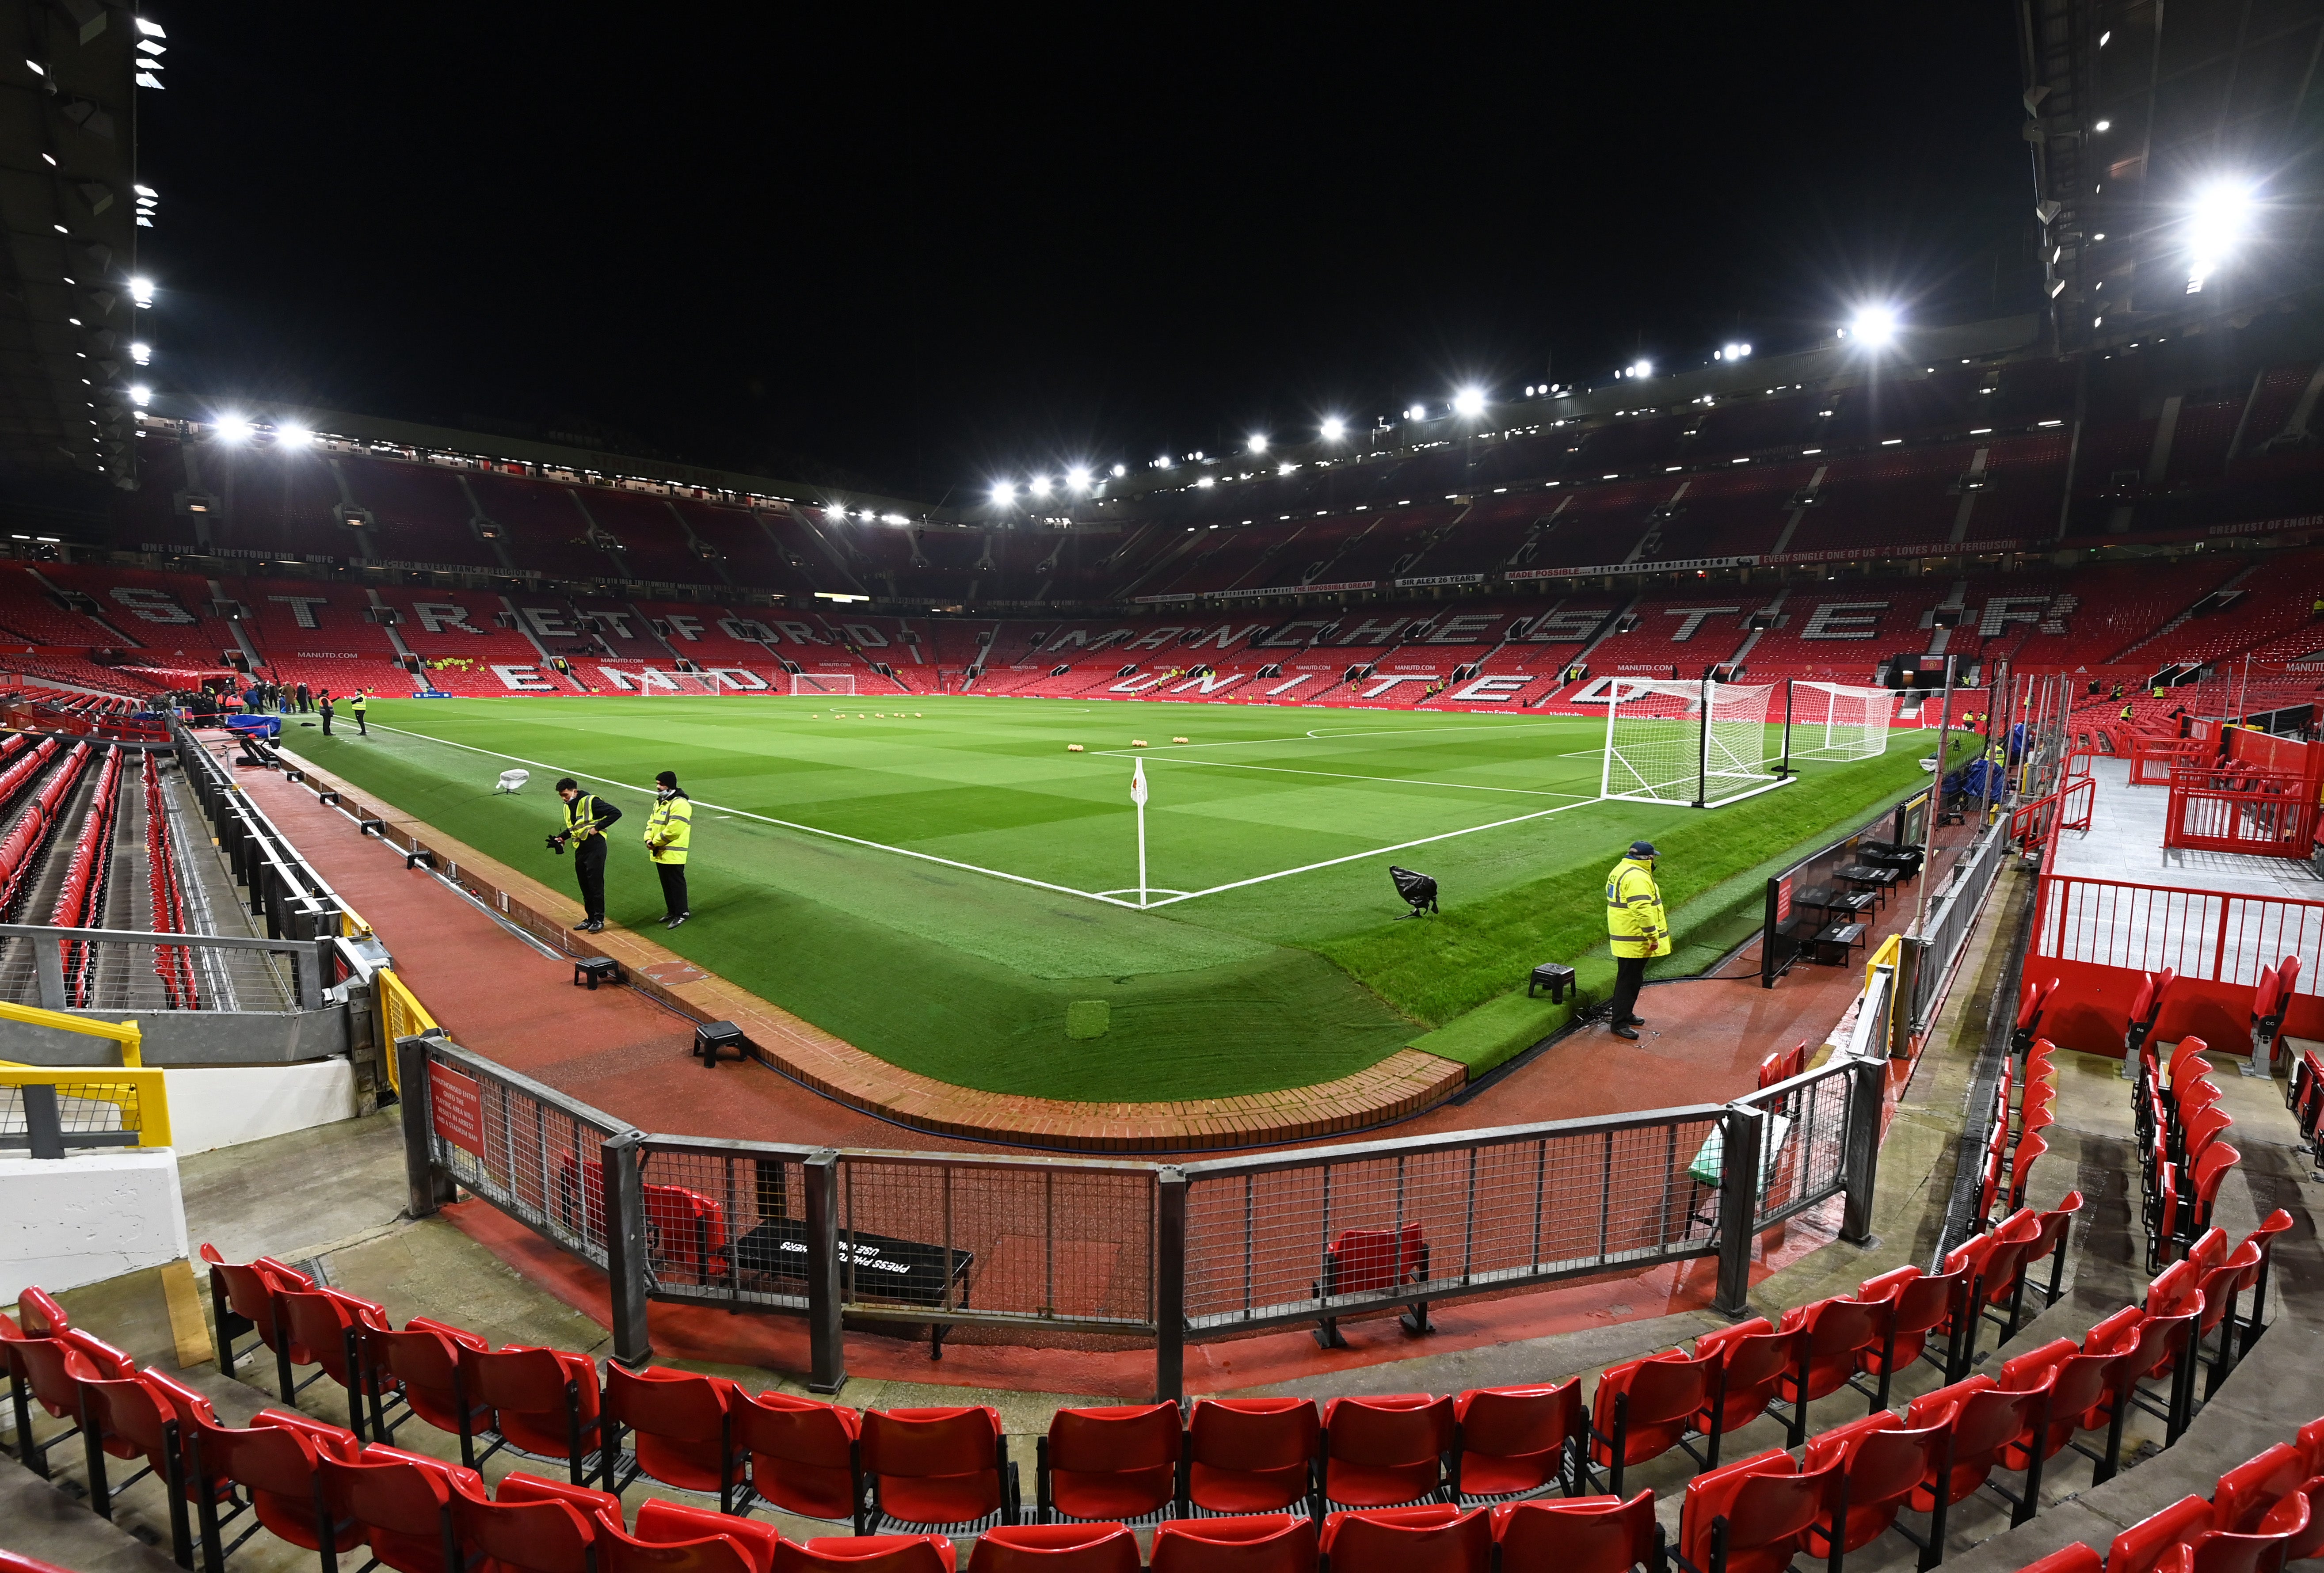 Old Trafford has a capacity of 76,000